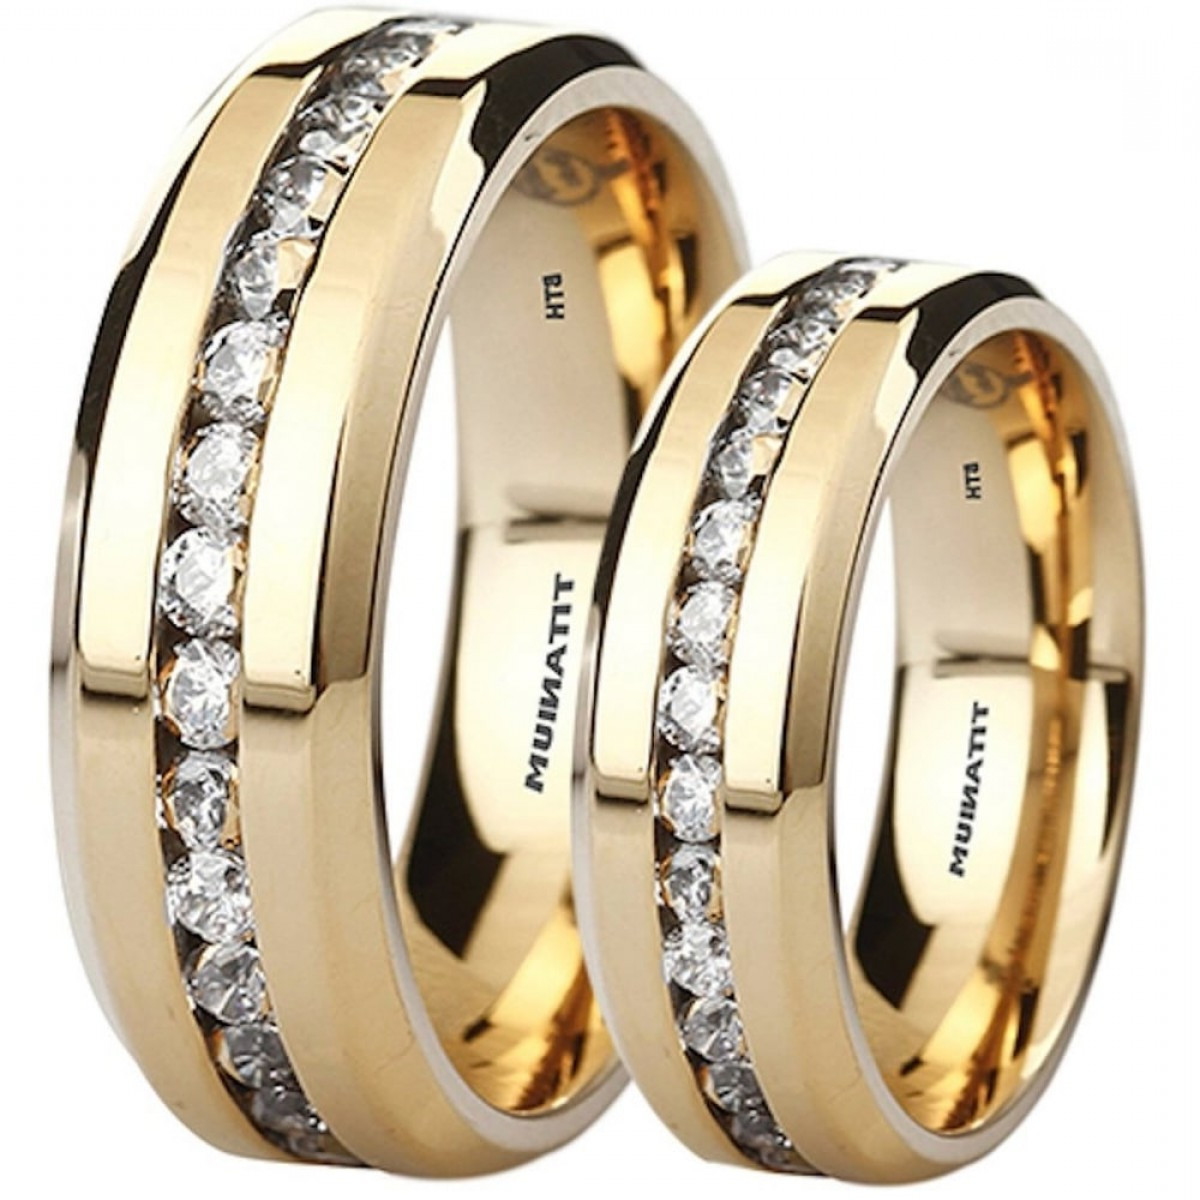 Wedding Bands Sets His And Her Matching
 His And Her Matching Wedding Rings Sets Ecuatwitt His